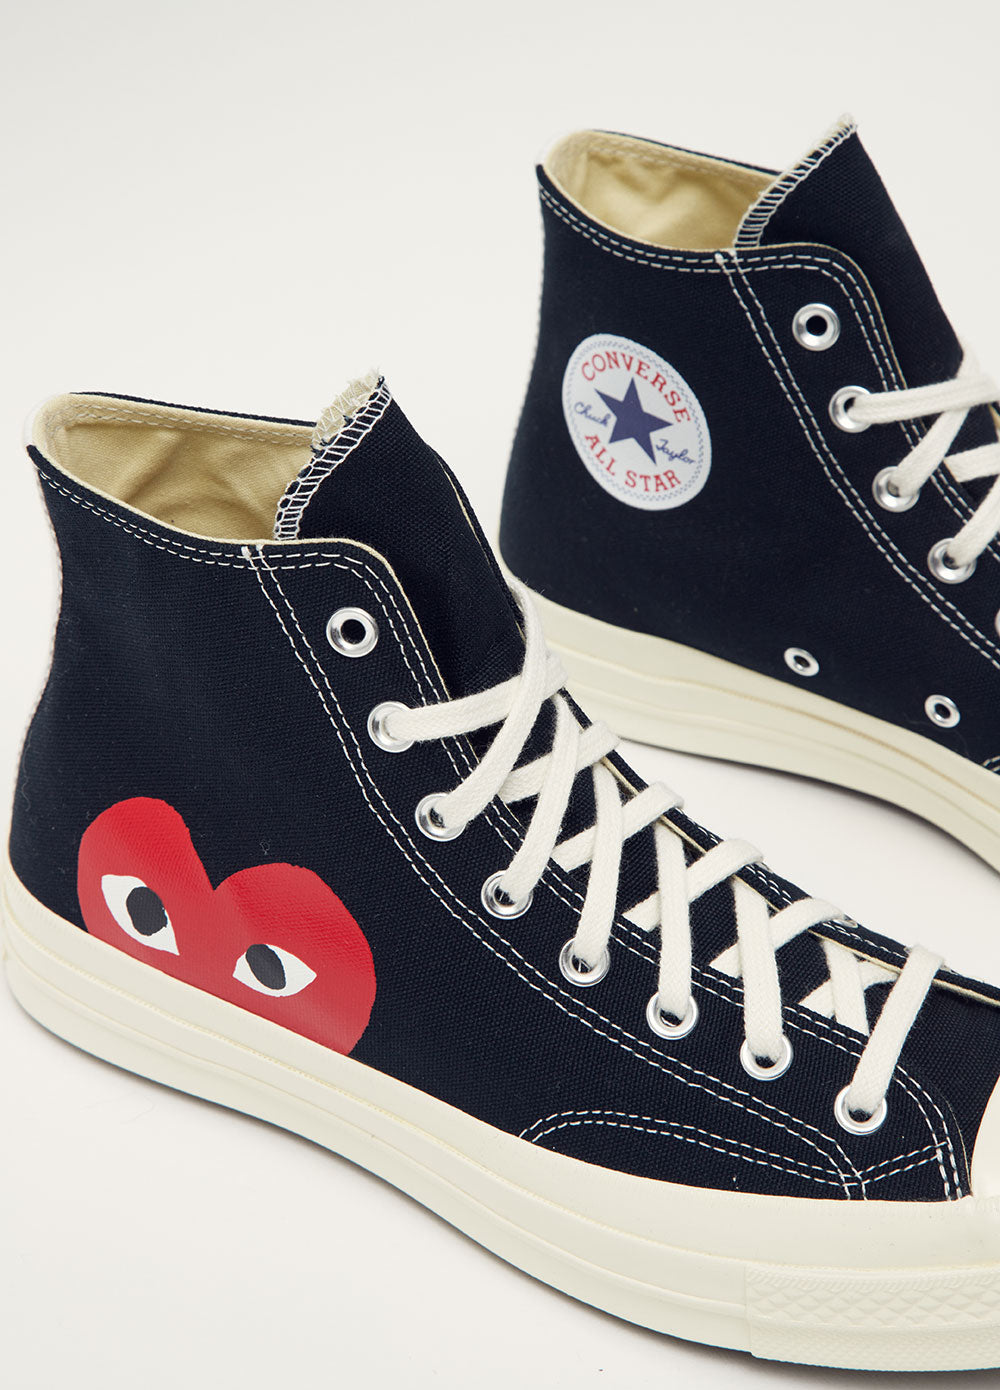 Men's x Converse K112 High-top Sneakers by Comme des Garcons PLAY | Incu